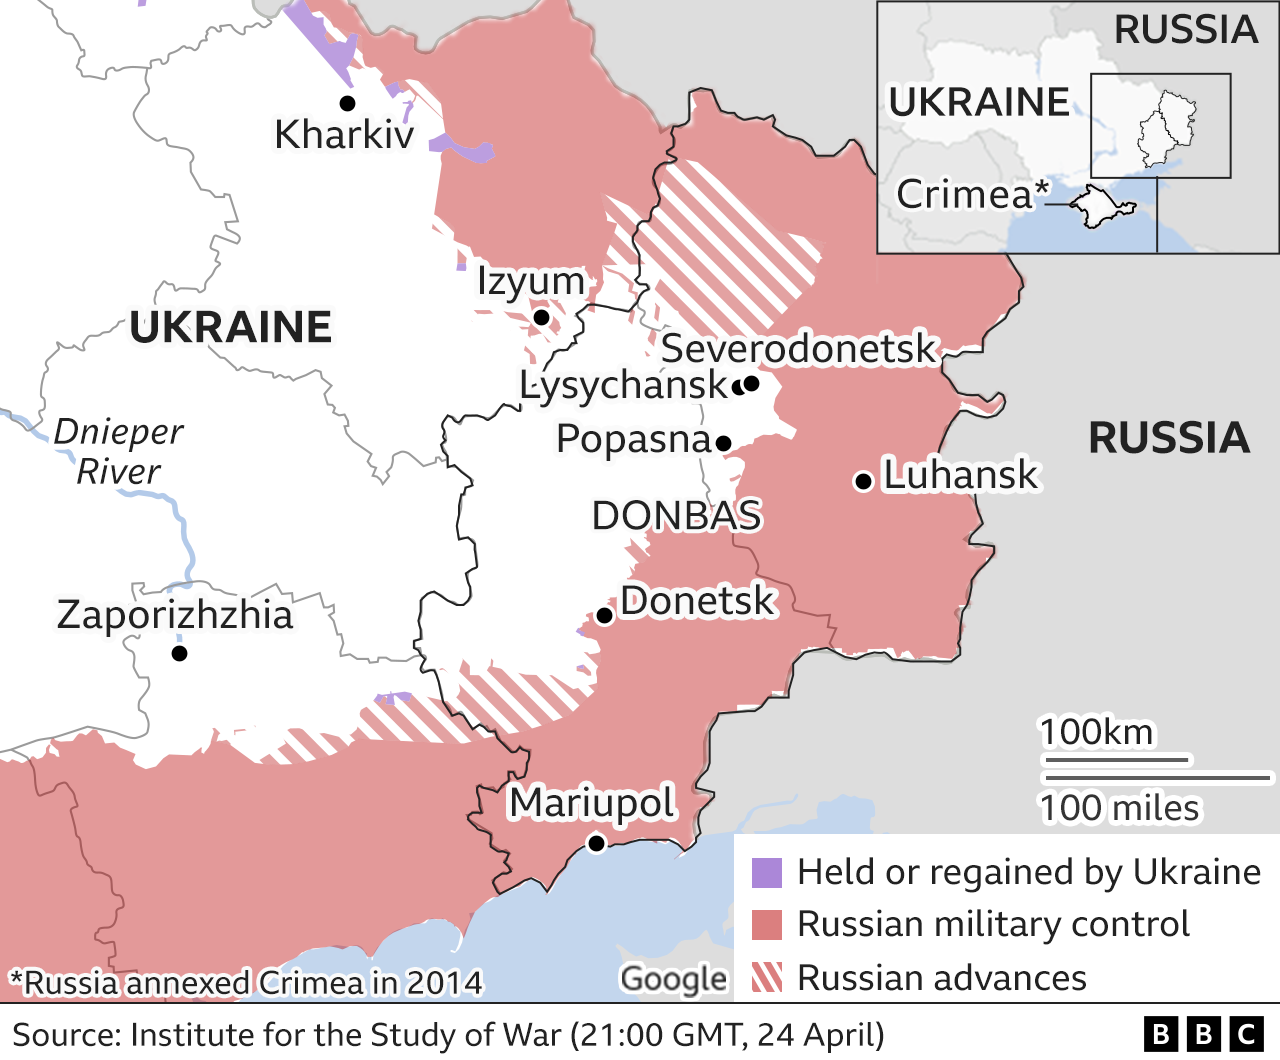 Ukraine Facing the Russian Army on the front line in Donbas BBC News